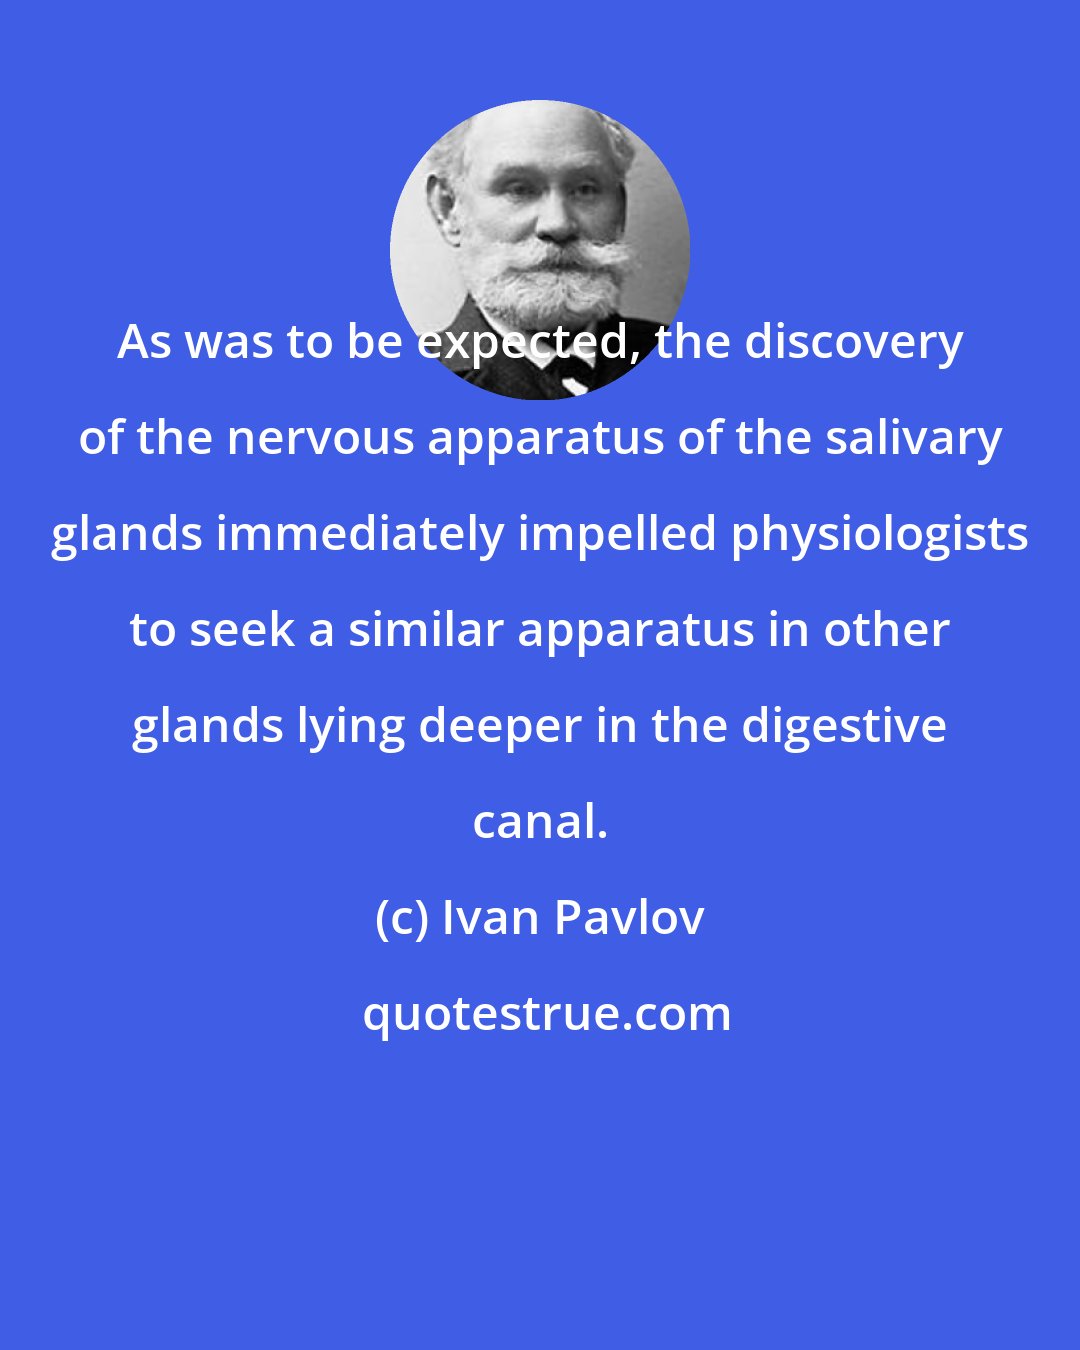 Ivan Pavlov: As was to be expected, the discovery of the nervous apparatus of the salivary glands immediately impelled physiologists to seek a similar apparatus in other glands lying deeper in the digestive canal.